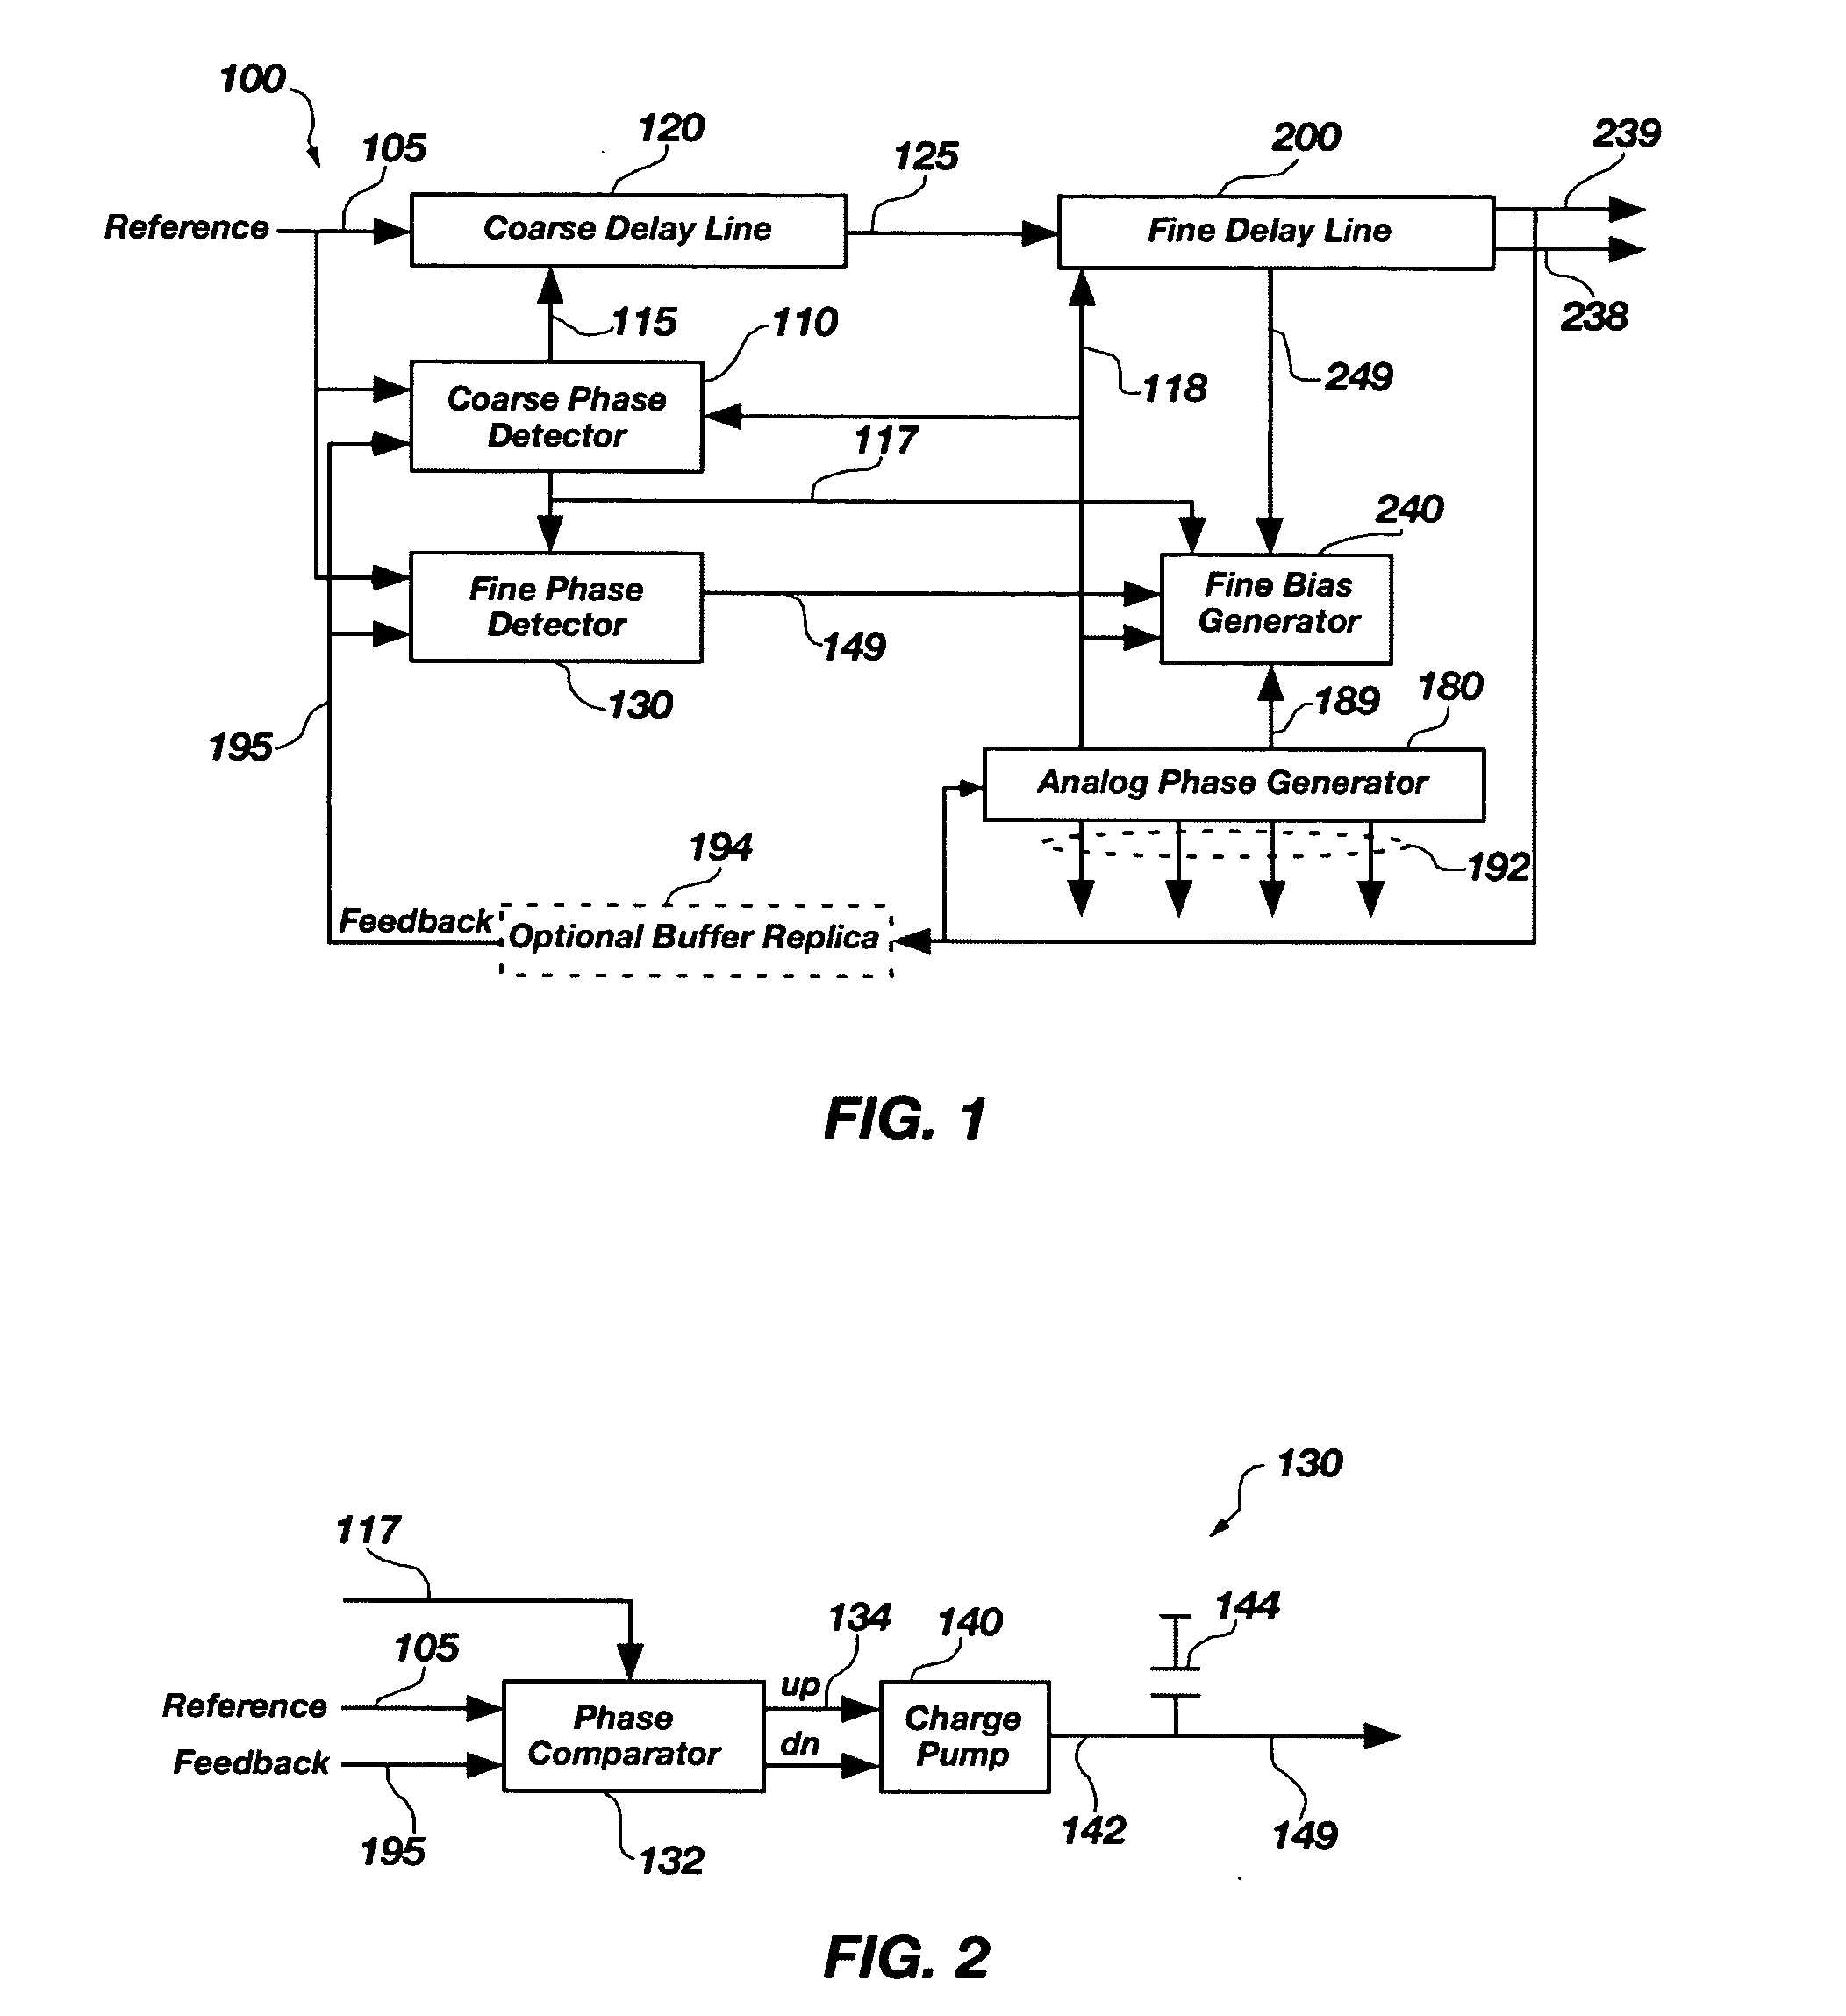 Method and apparatus to set a tuning range for an analog delay